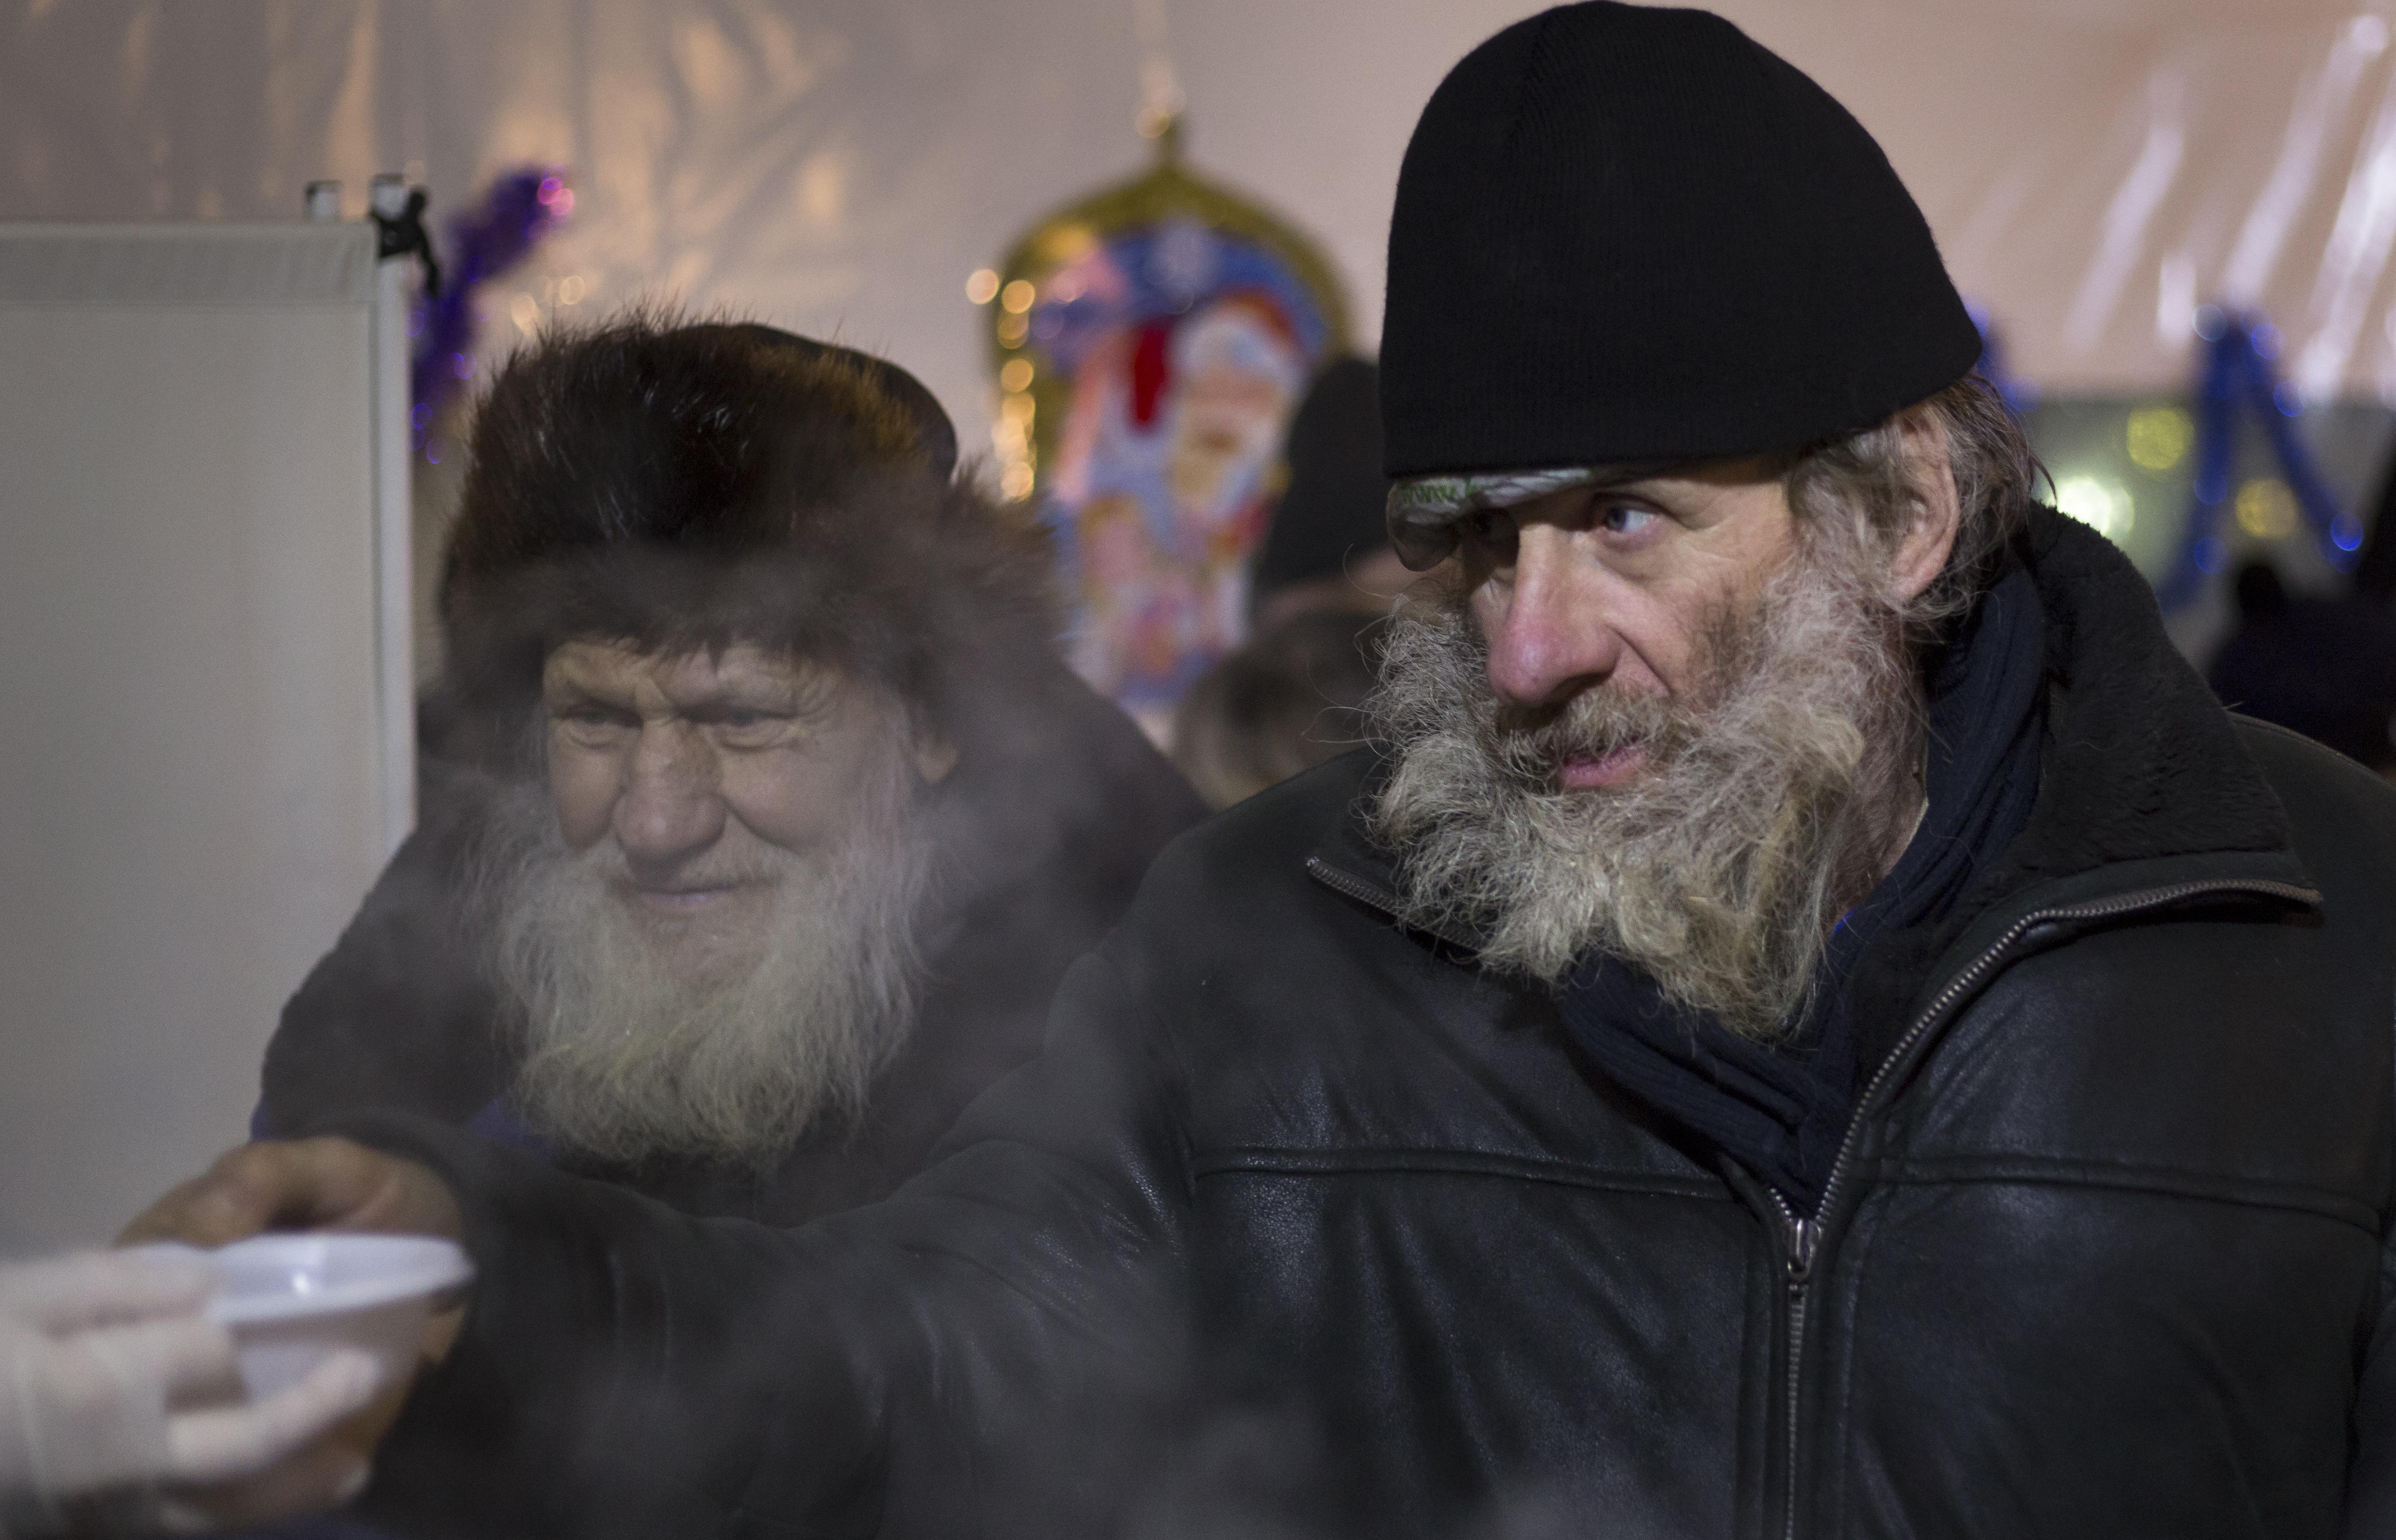 Half of Russians Consider Themselves To Be Poor, Study Finds